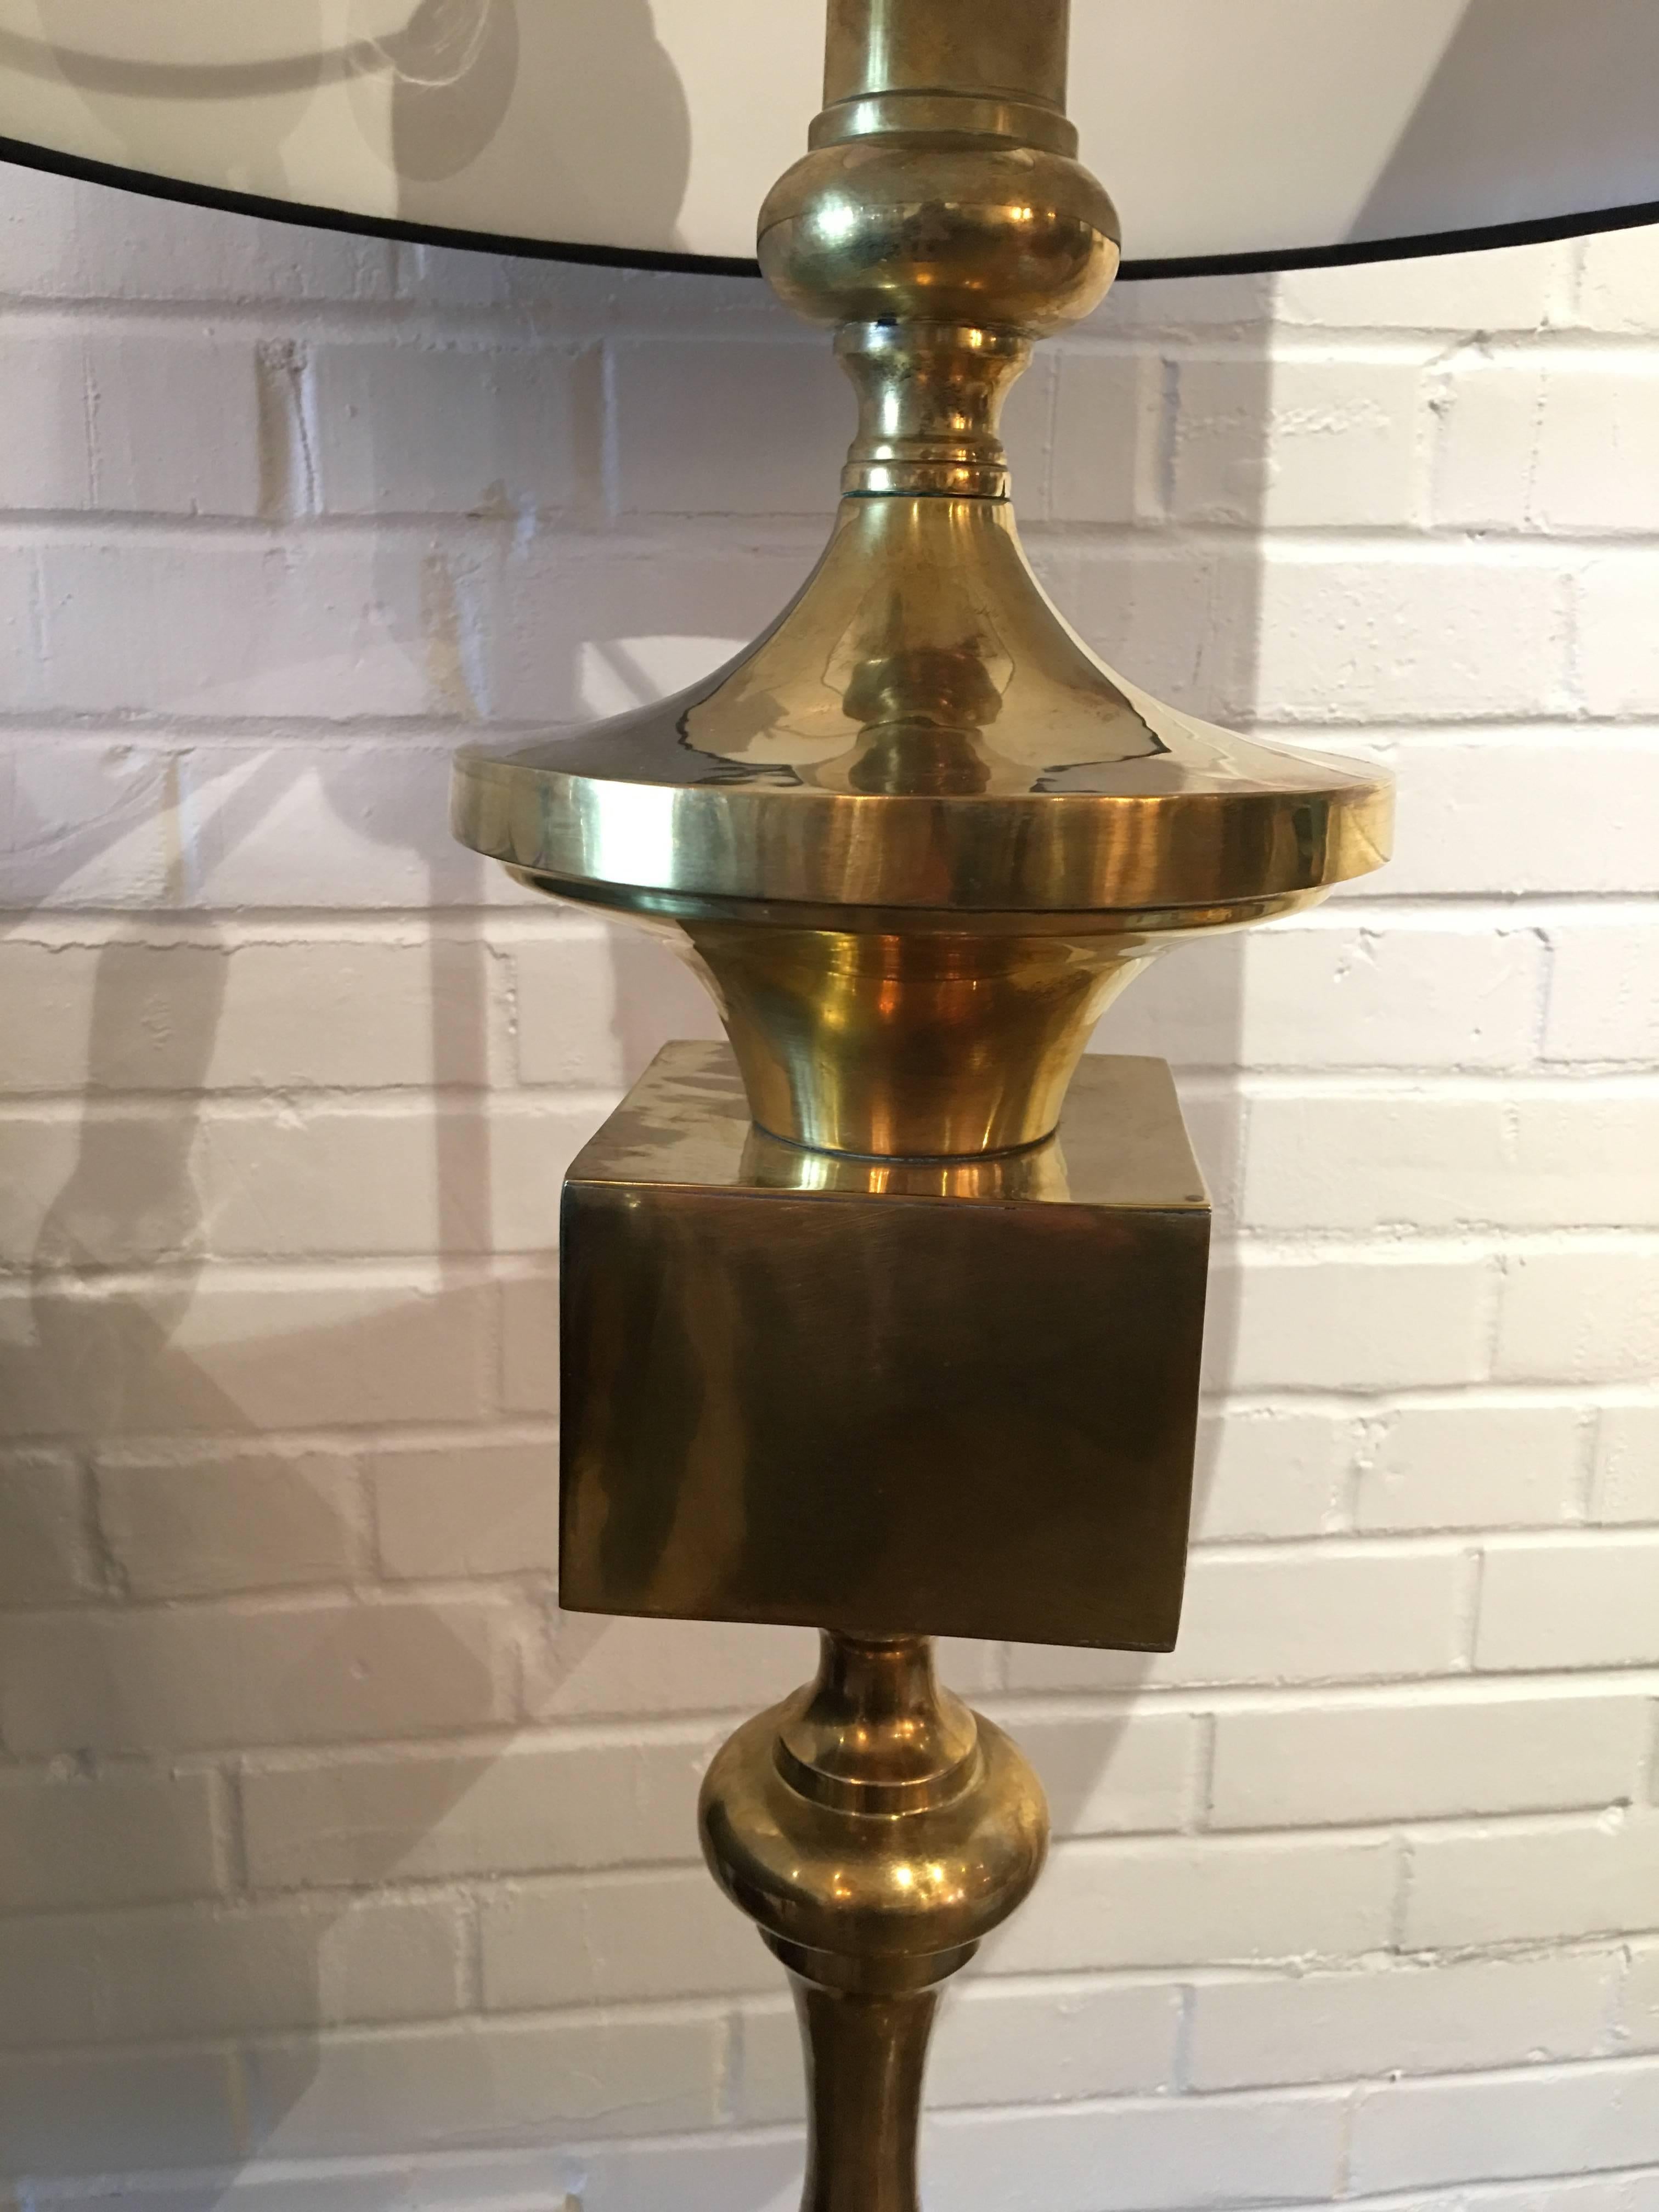 This large brass sculptural midcentury lamp is quite impressive. It has a new black linen lamp shade. The lamp holds three lightbulbs with each one lit independently.